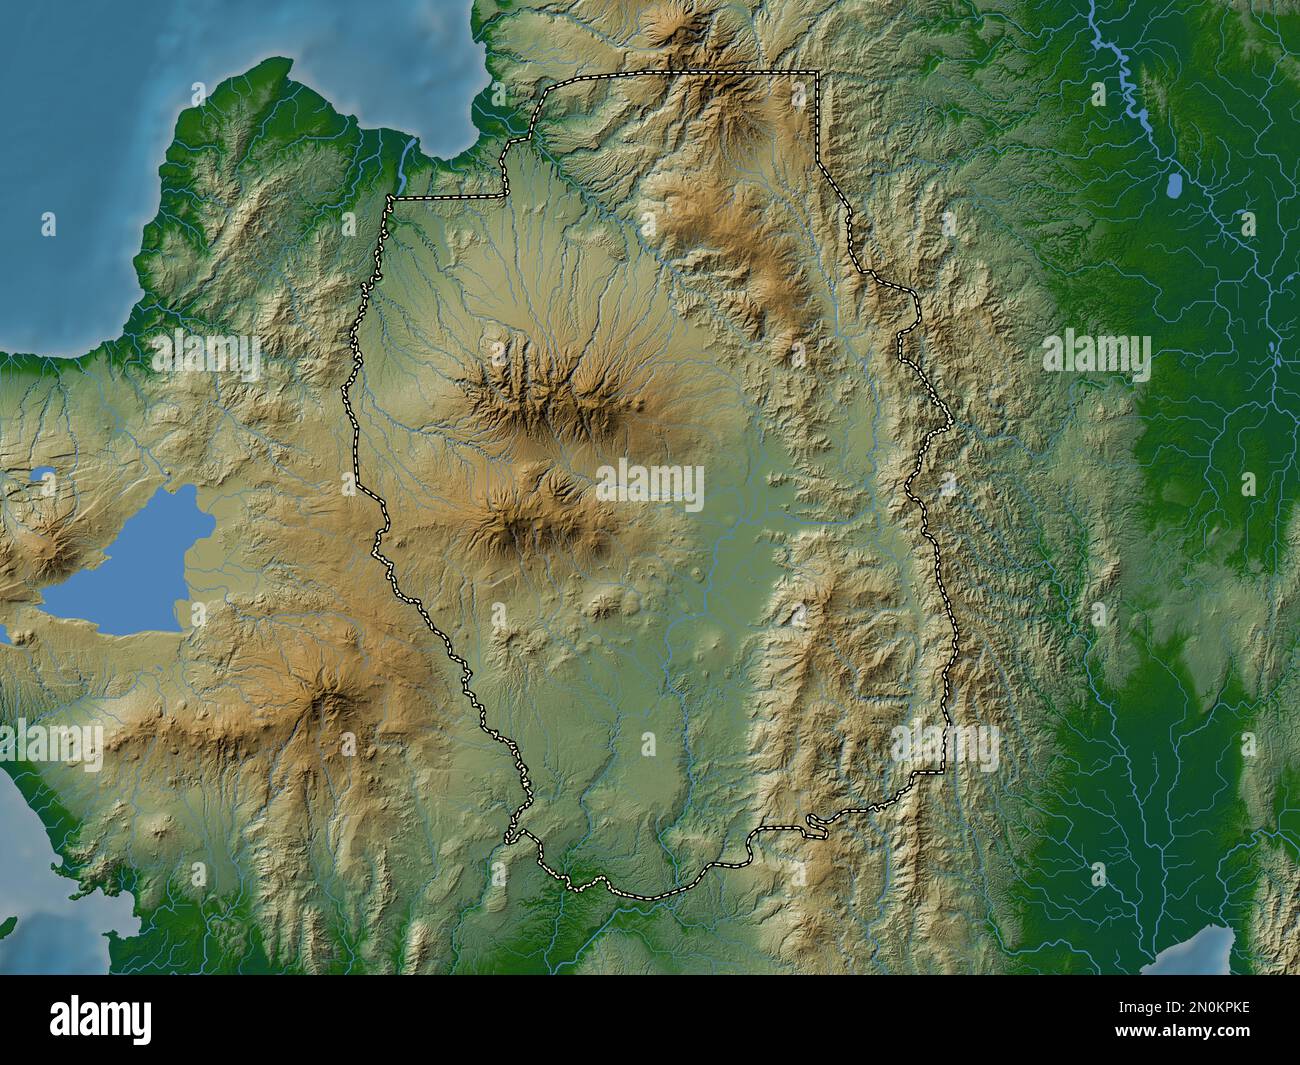 Bukidnon, province of Philippines. Colored elevation map with lakes and rivers Stock Photo